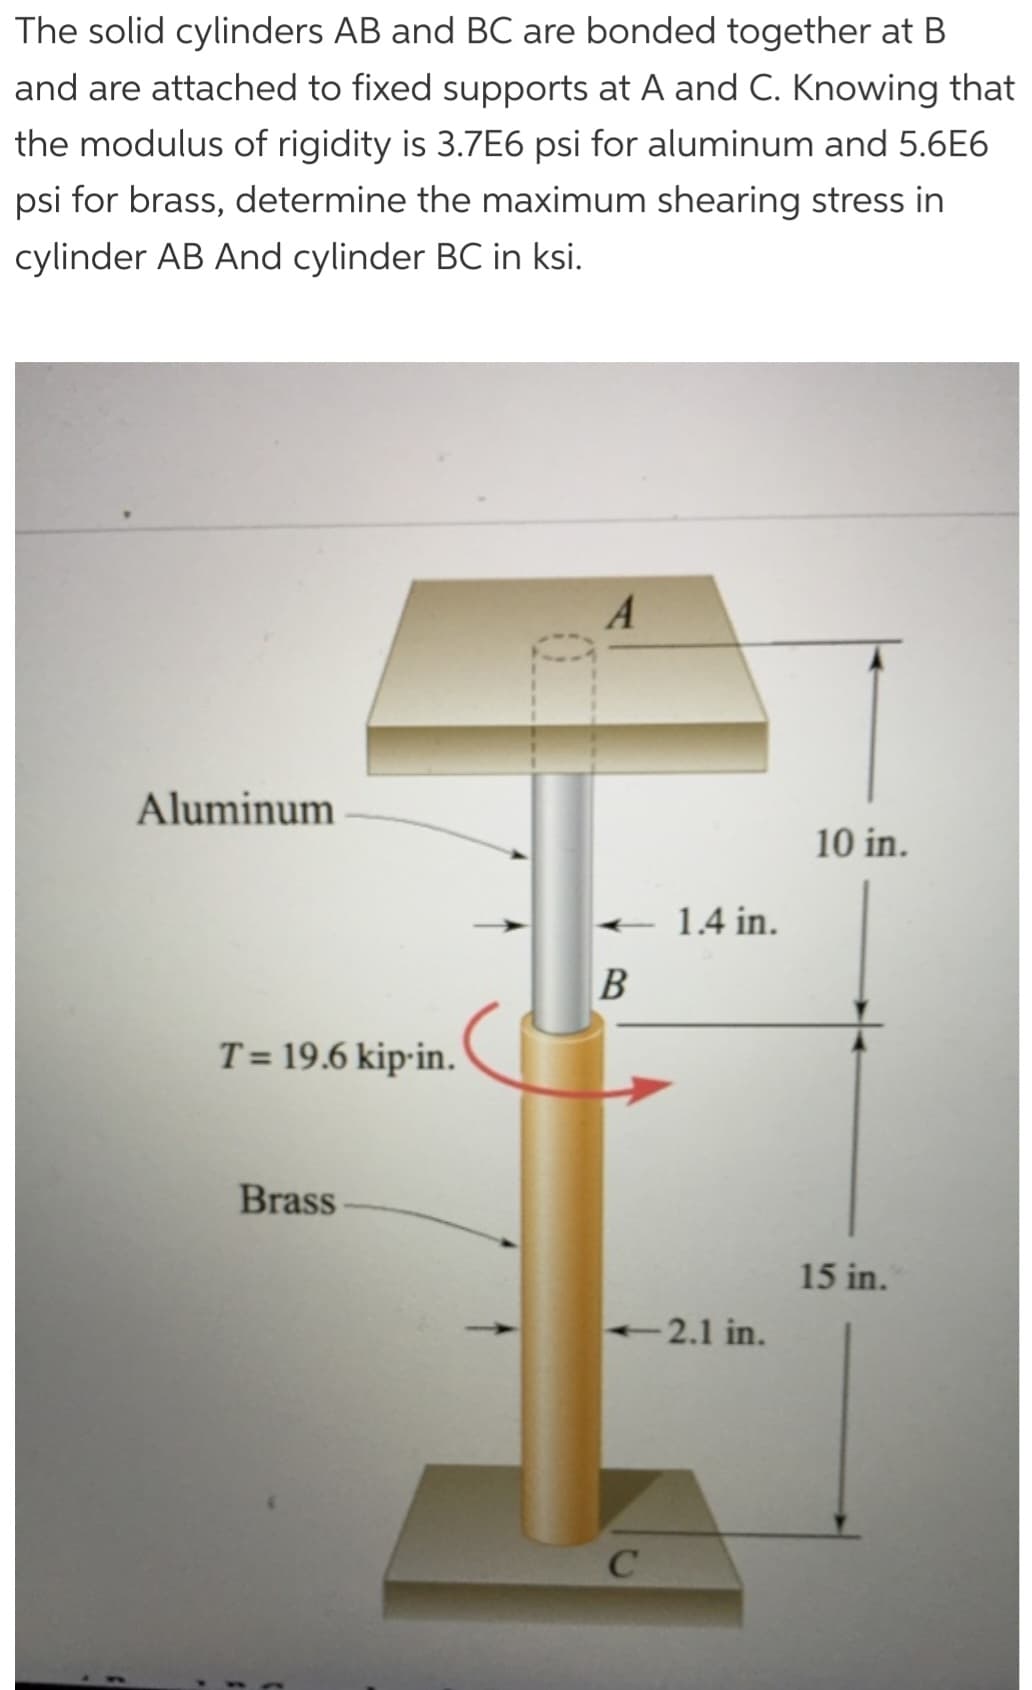 The solid cylinders AB and BC are bonded together at B
and are attached to fixed supports at A and C. Knowing that
the modulus of rigidity is 3.7E6 psi for aluminum and 5.6E6
psi for brass, determine the maximum shearing stress in
cylinder AB And cylinder BC in ksi.
1
Aluminum
T= 19.6 kip-in.
Brass
A
- 1.4 in.
B
<-2.1 in.
C
10 in.
15 in.